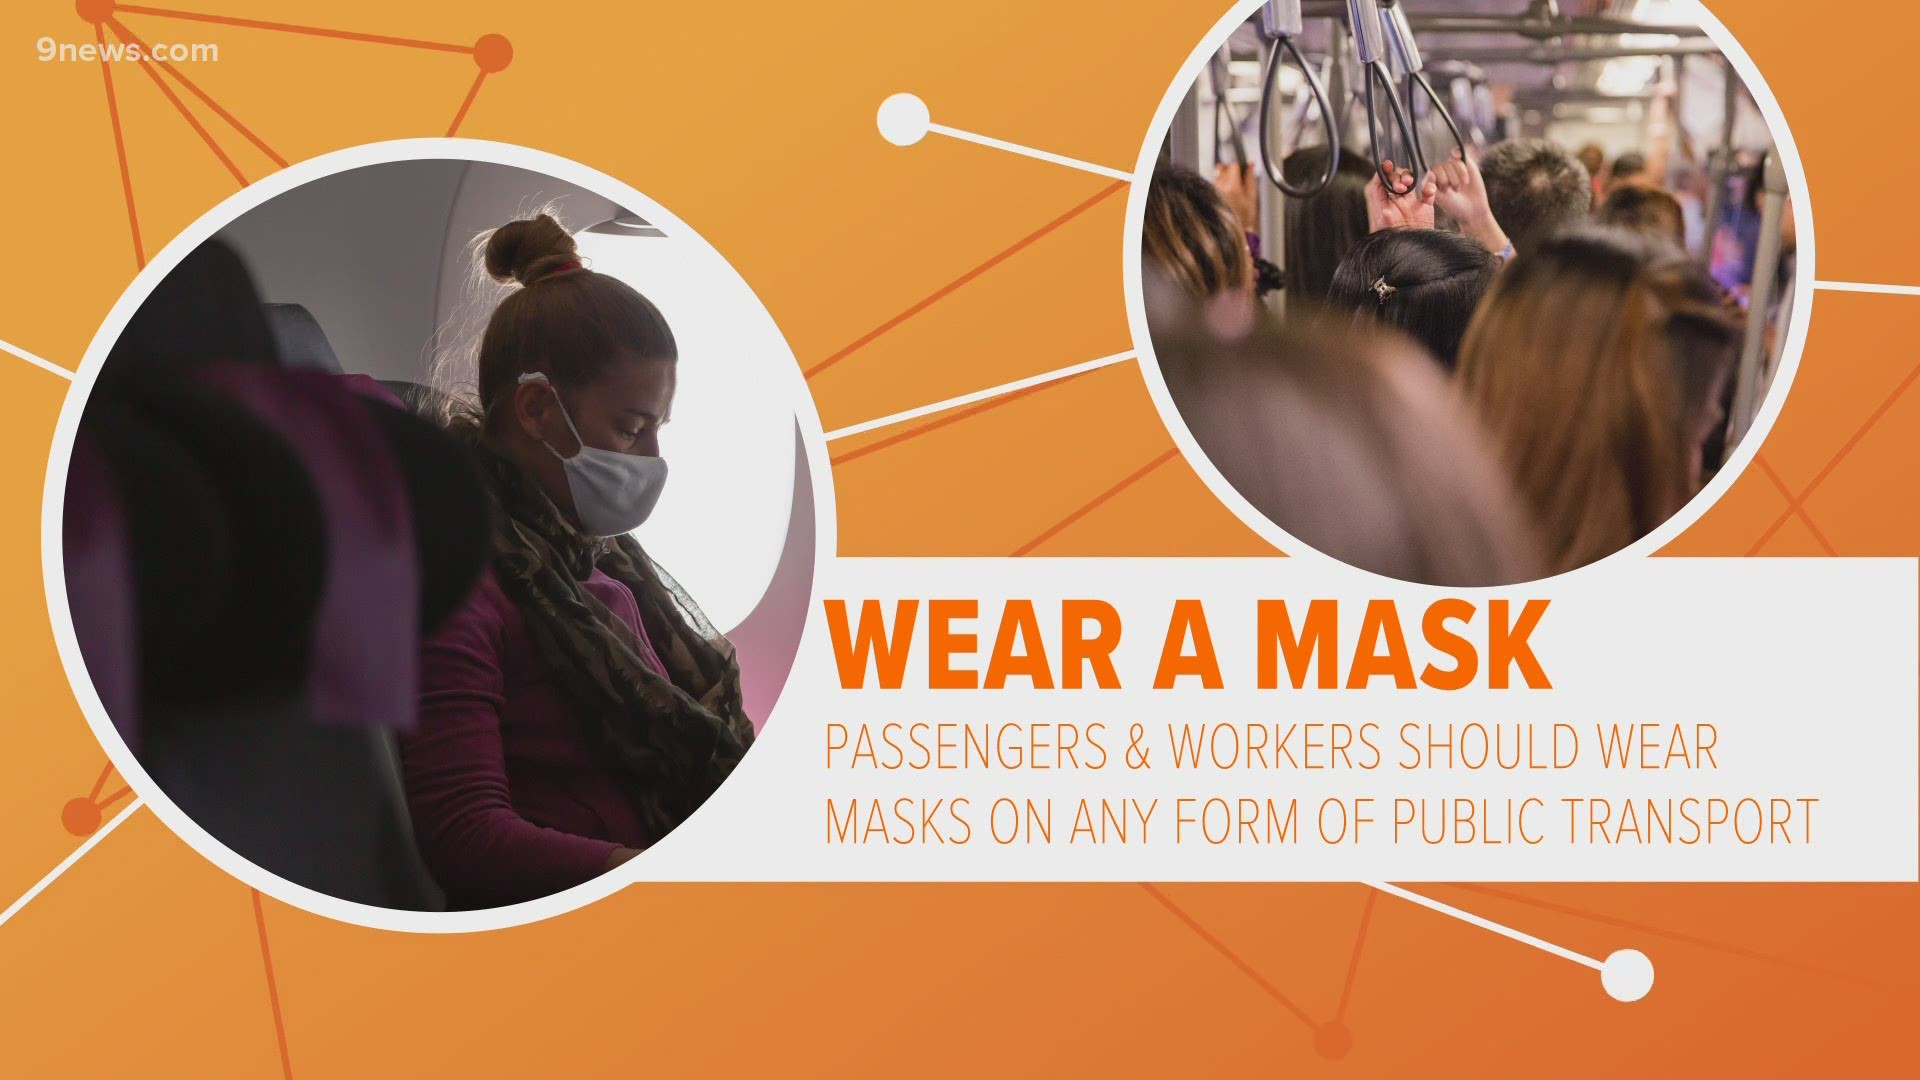 With rising cases in Colorado and across the country, the CDC has a new guidance strongly recommending people wear face coverings while traveling.